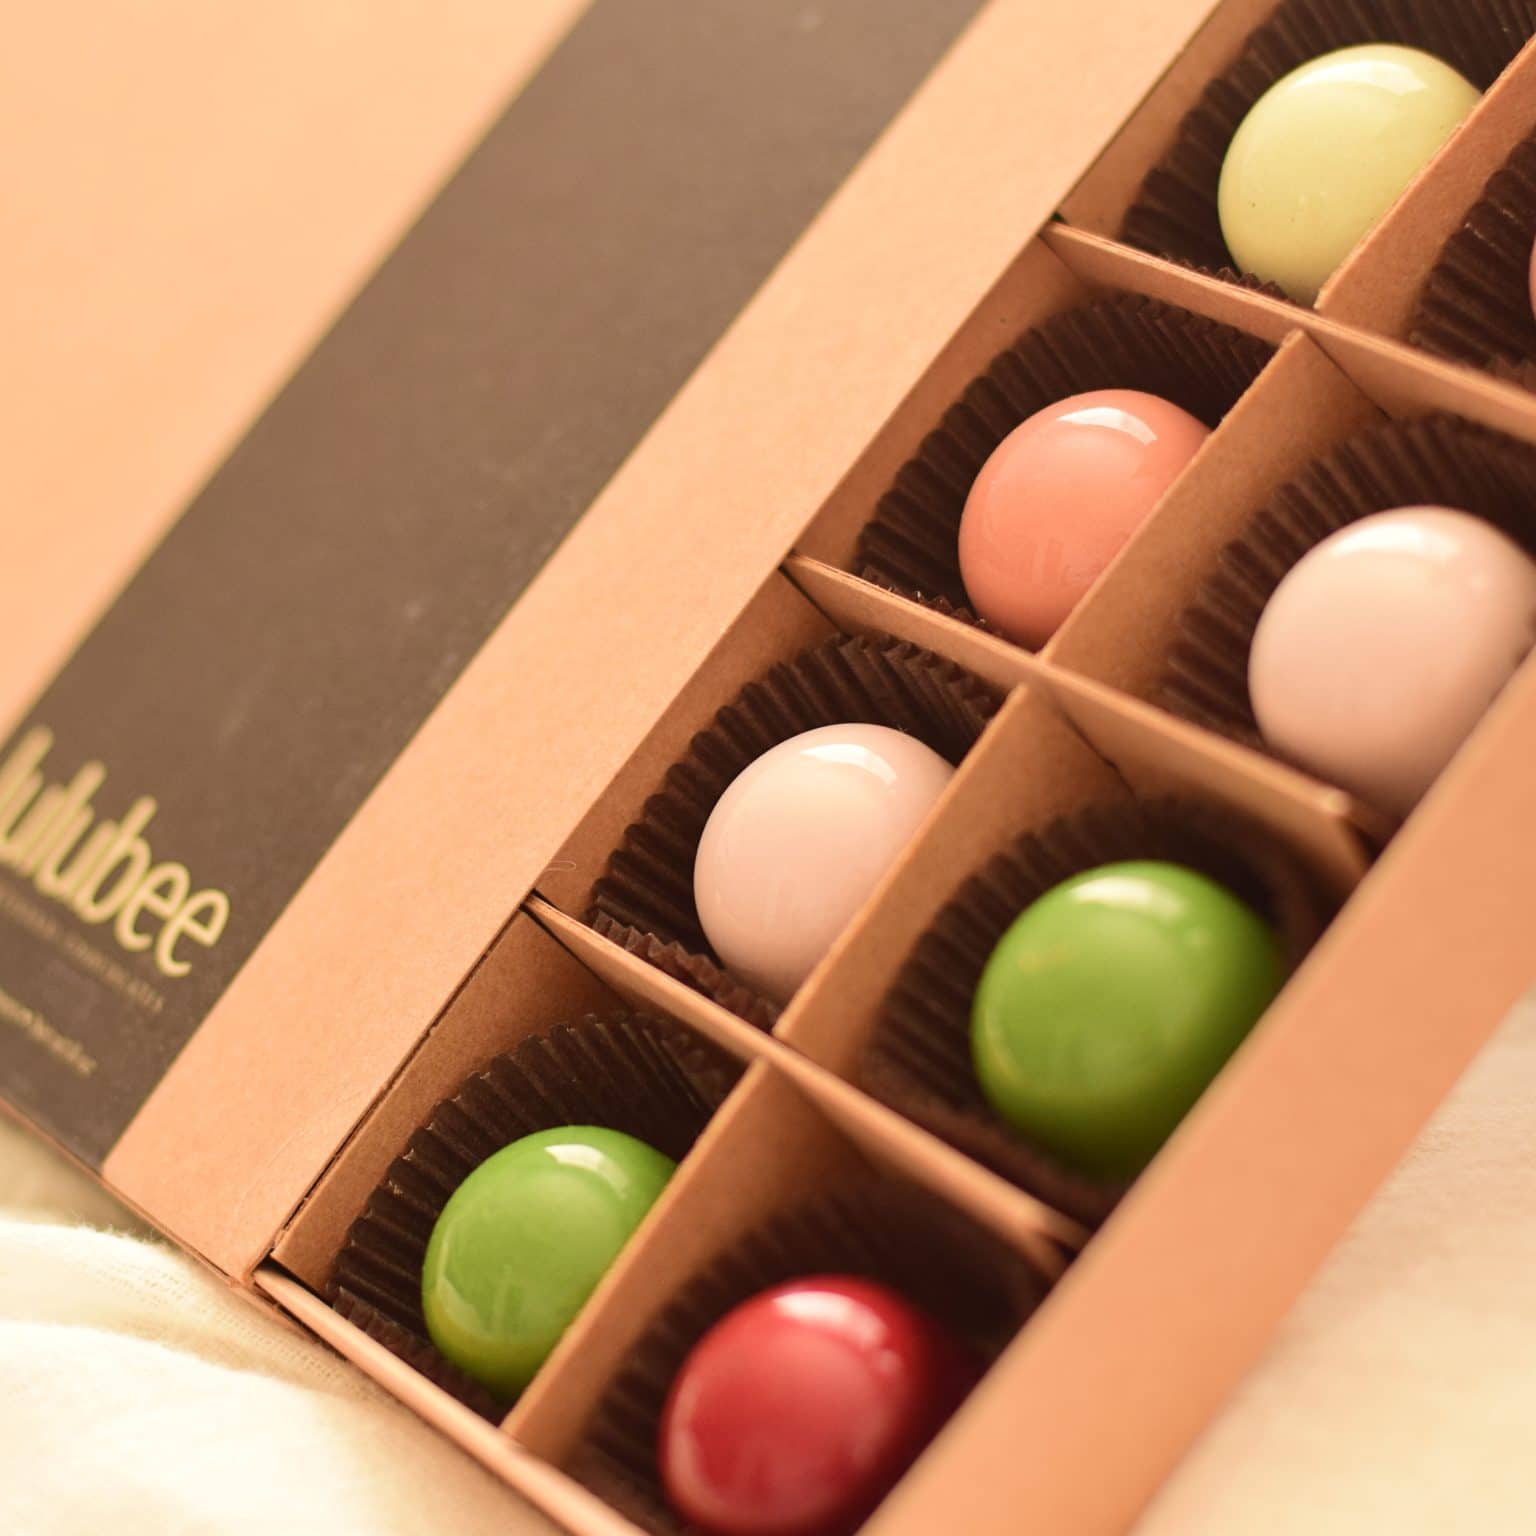 24-piece box of pastel-colored gourmet chocolate truffles in a kraft box with a label that reads Lulubee Artisanal Chocolates